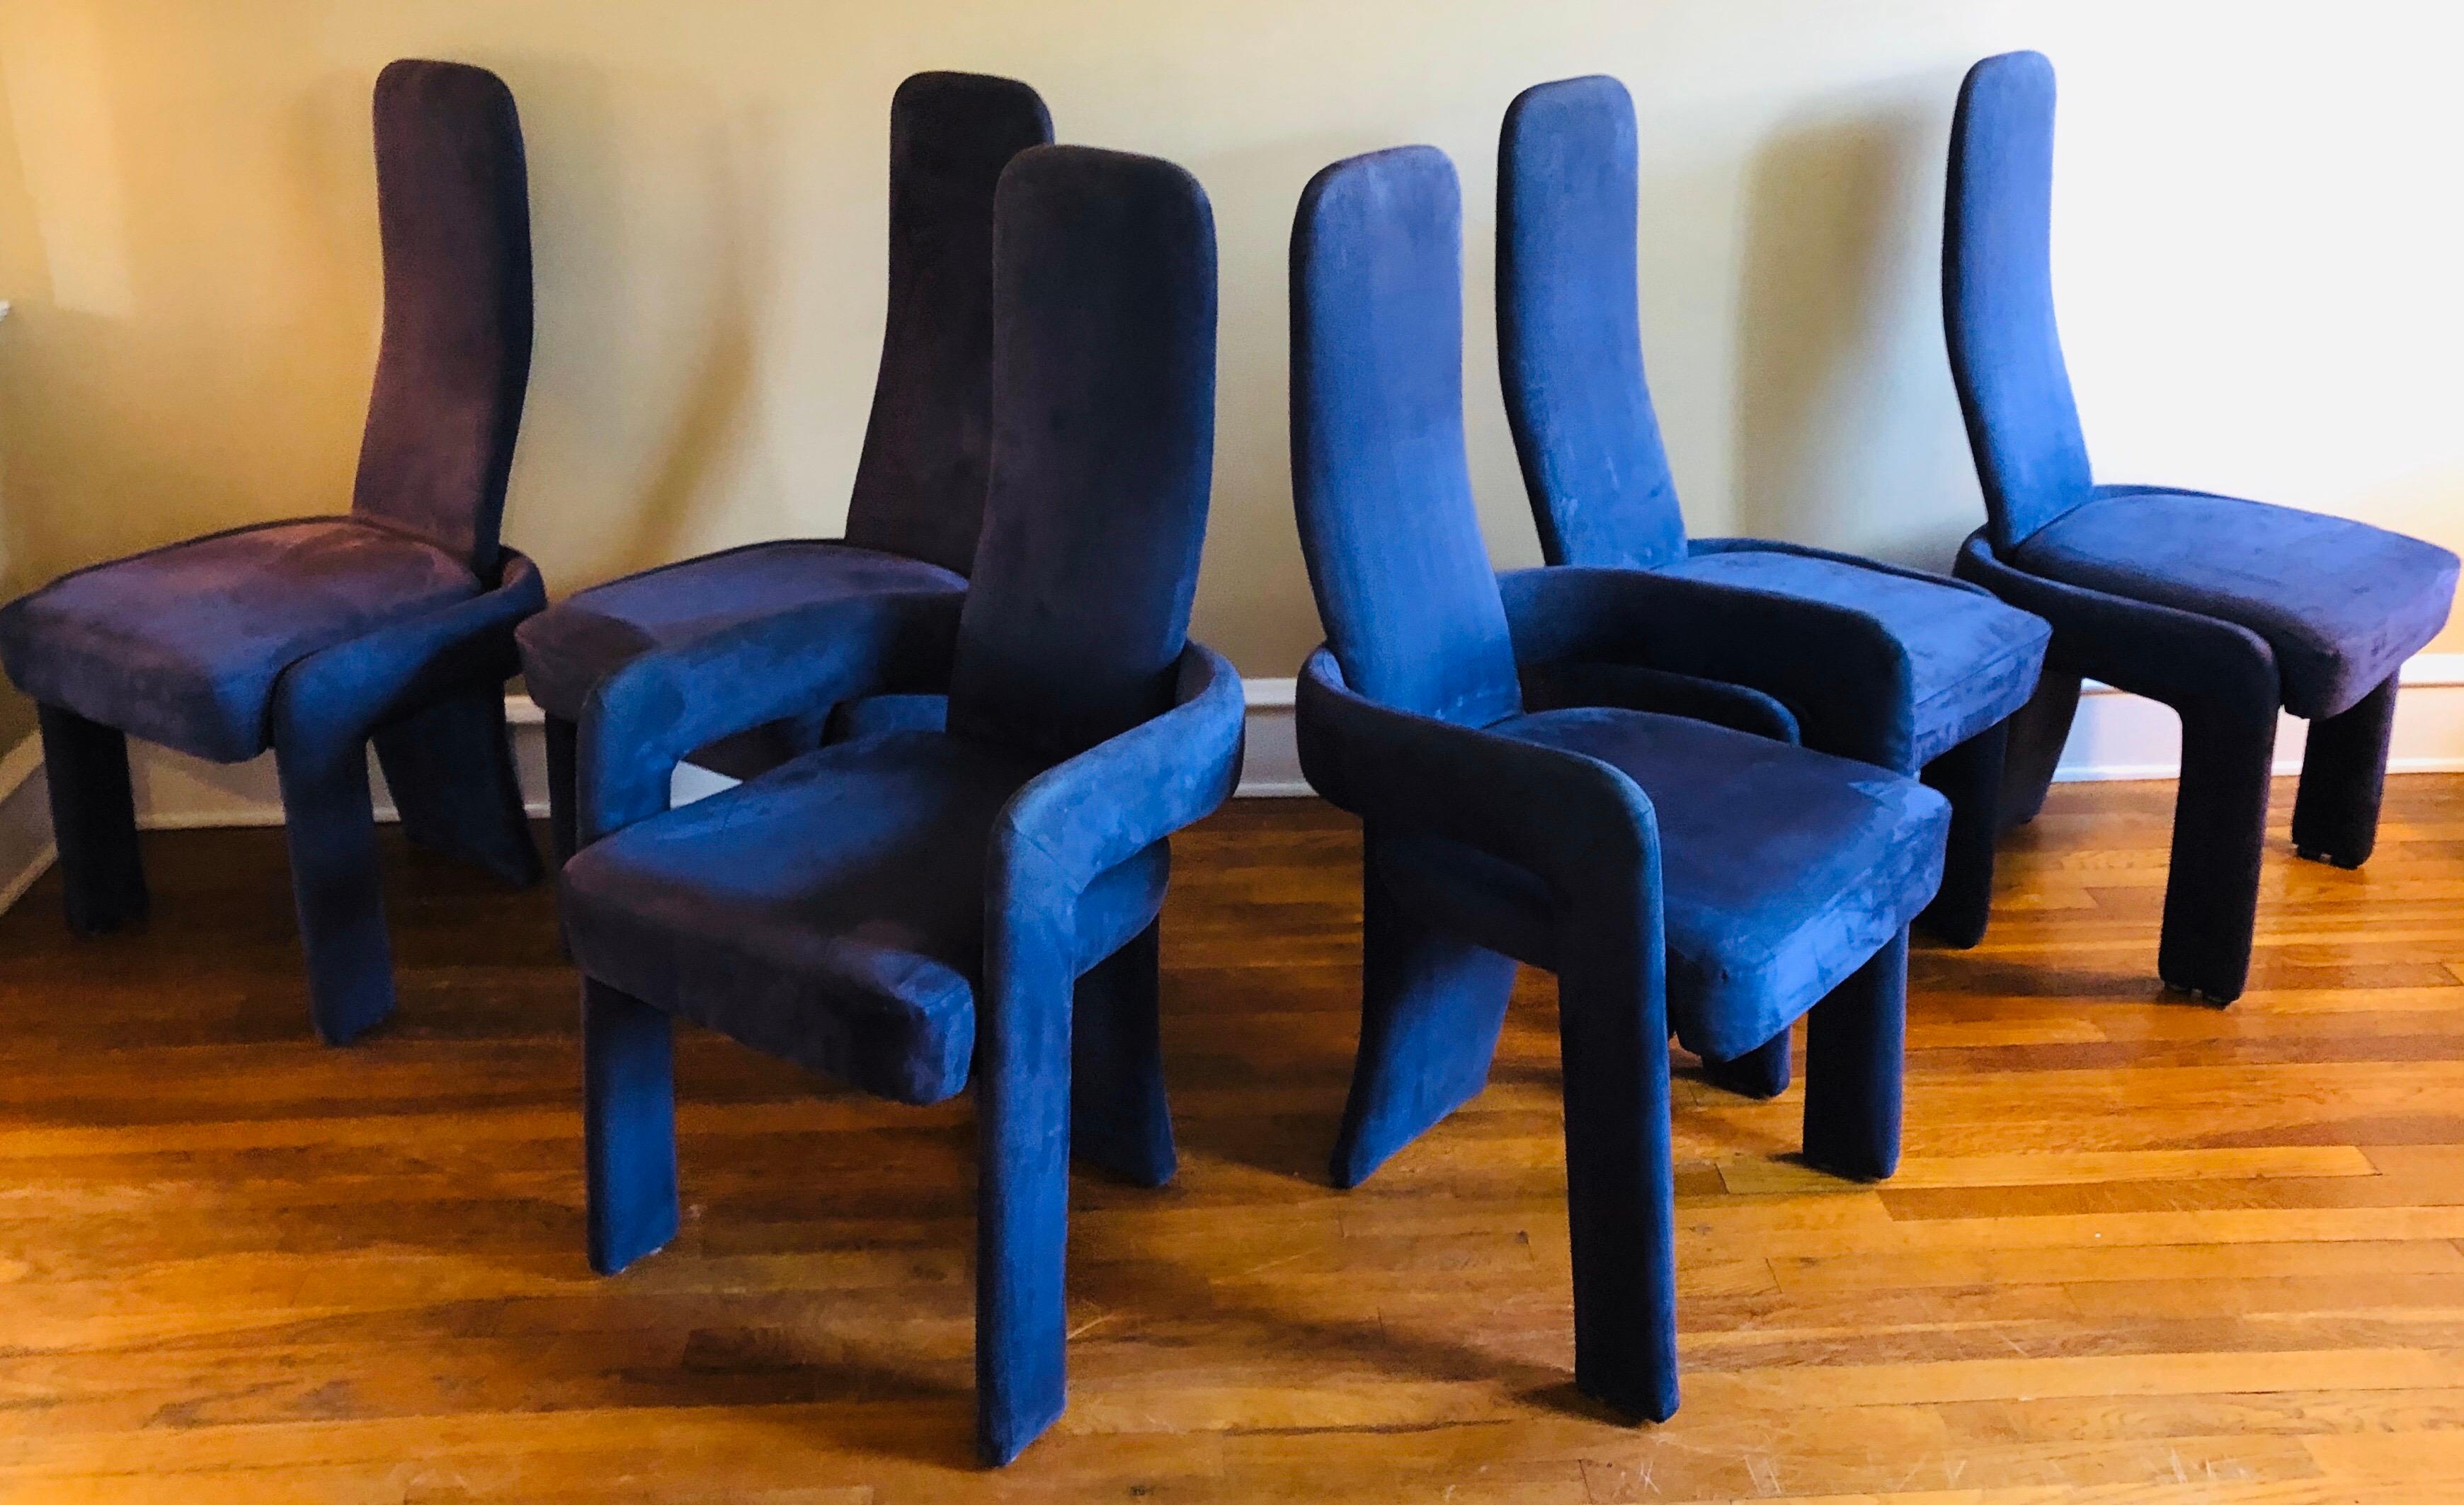 Sculptural Postmodern Dining Chairs - Set of 6 2